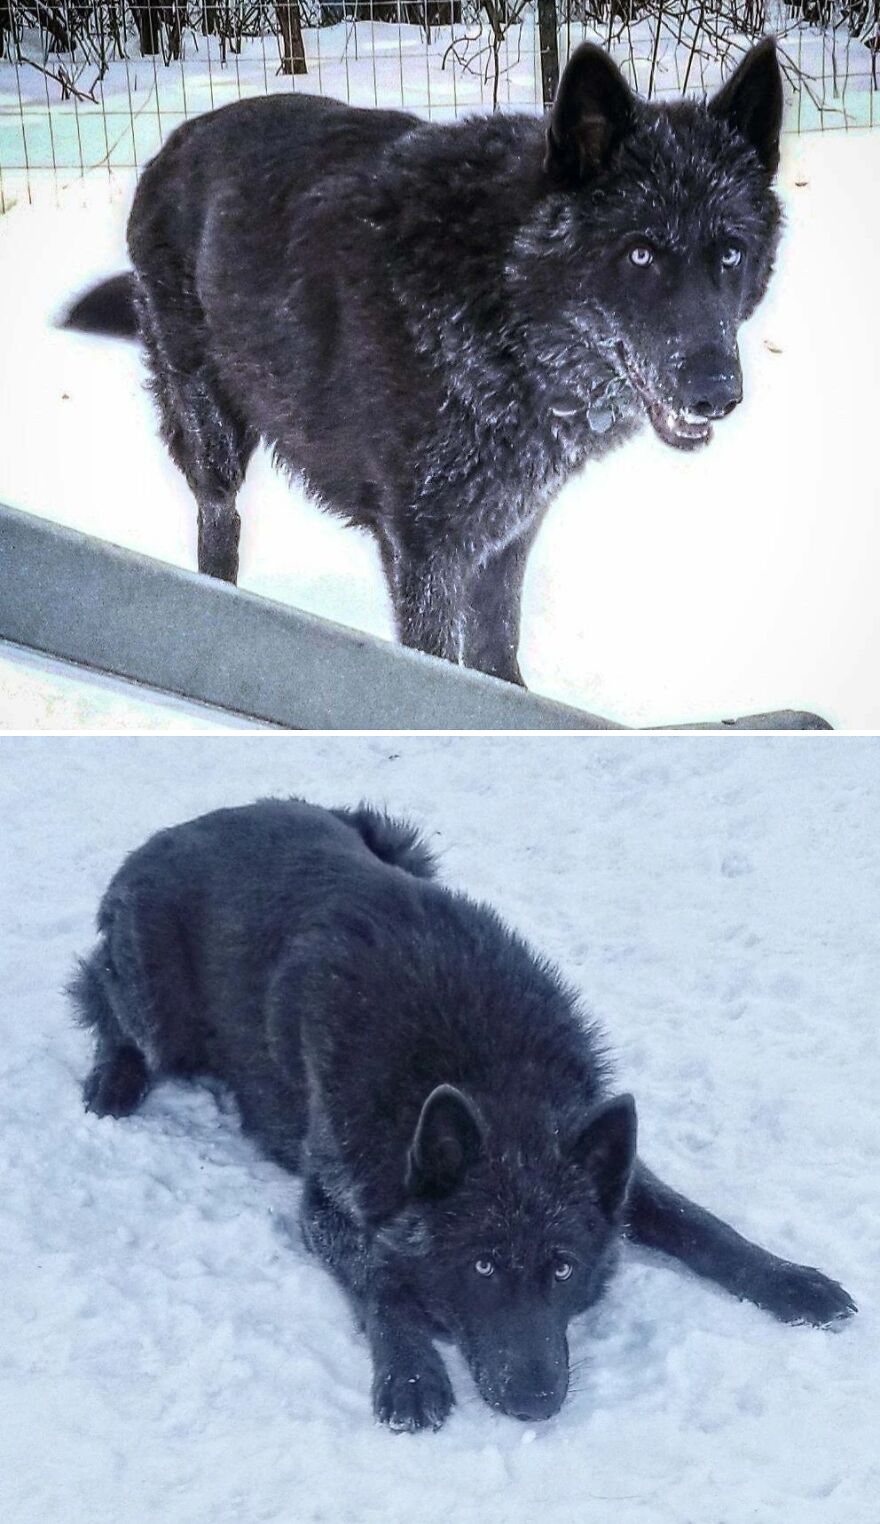 I Took These Photos Of Ruka (Low Content) When We Had Snow. It Was A Pretty Cold Day But She Refused To Come Inside Lol